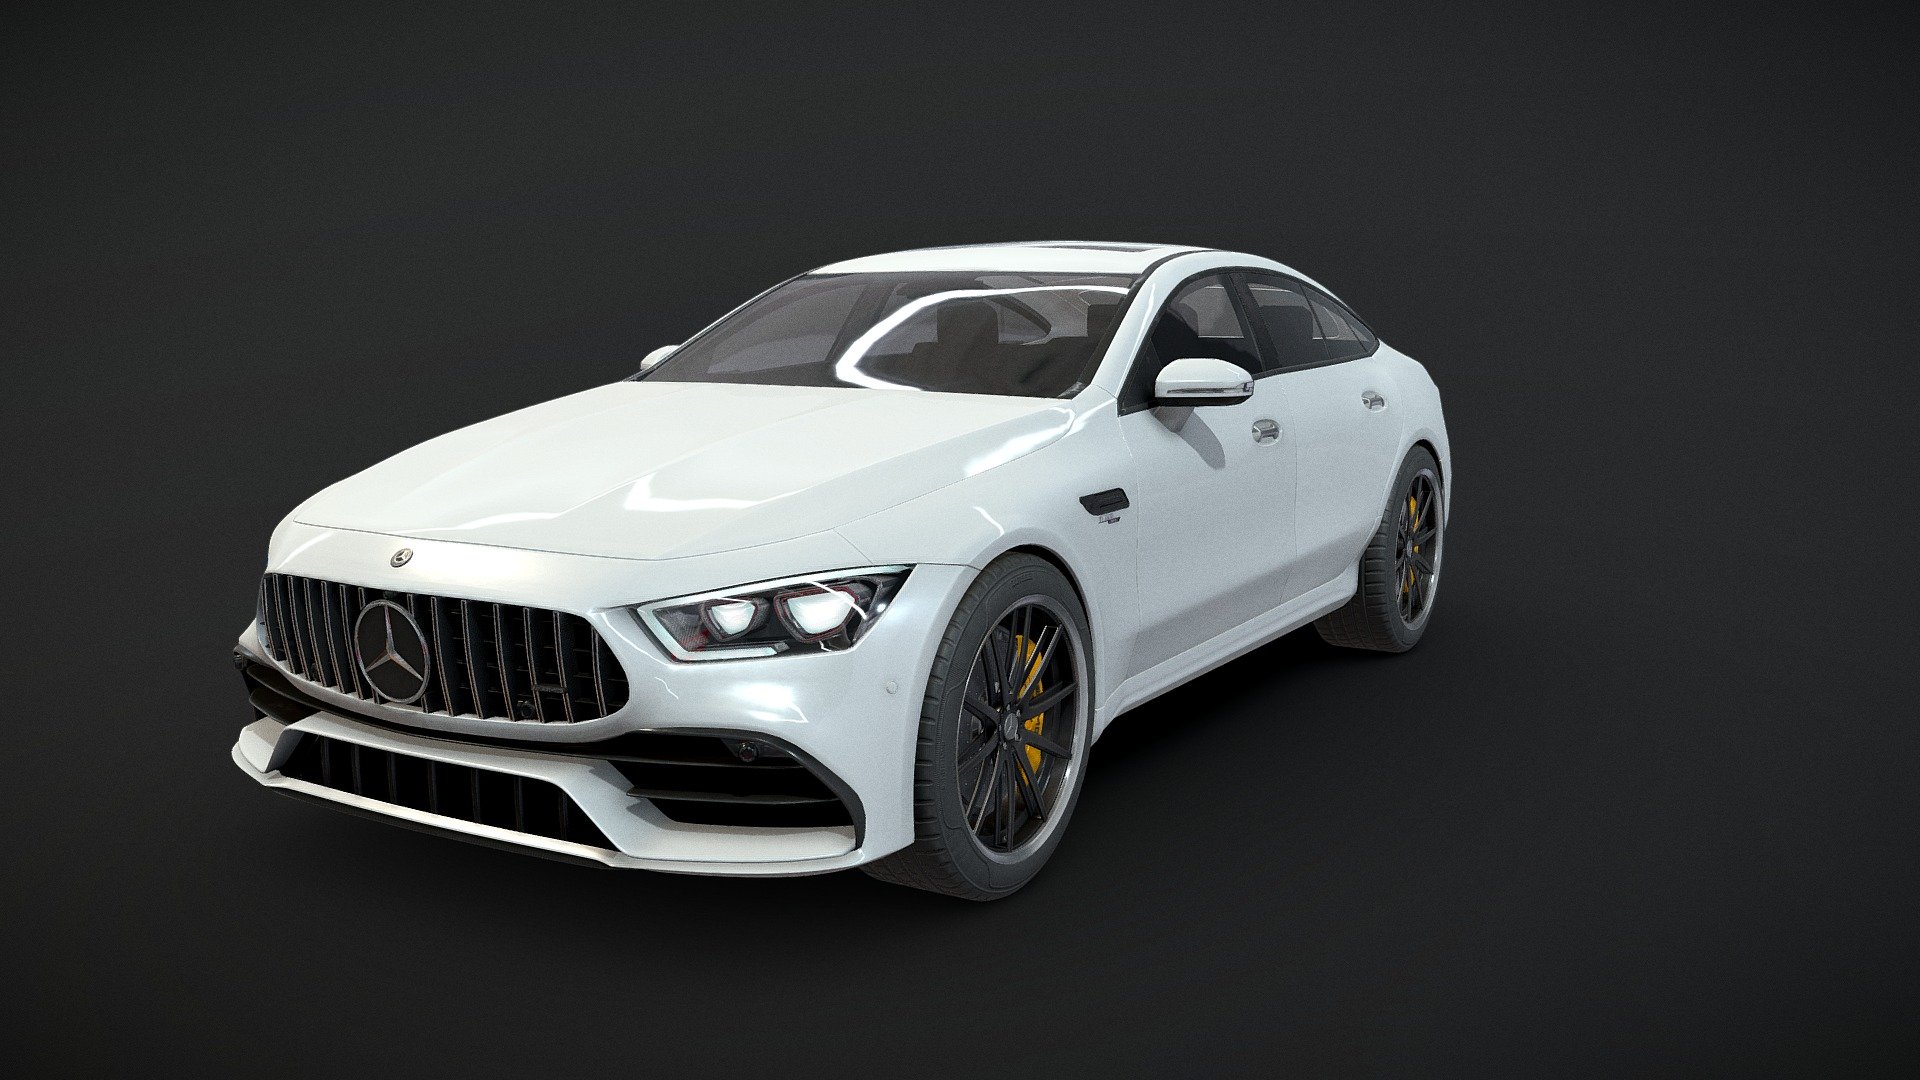 Modelled with 3ds Max

Baked with Marmoset Toolbag

Textured with Substance Painter

Rendered with Sketchfab

non-commercial production for personal use - Mercedes AMG GT 54 - 4 Door - 3D model by Vincent Leder (@madroce) 3d model